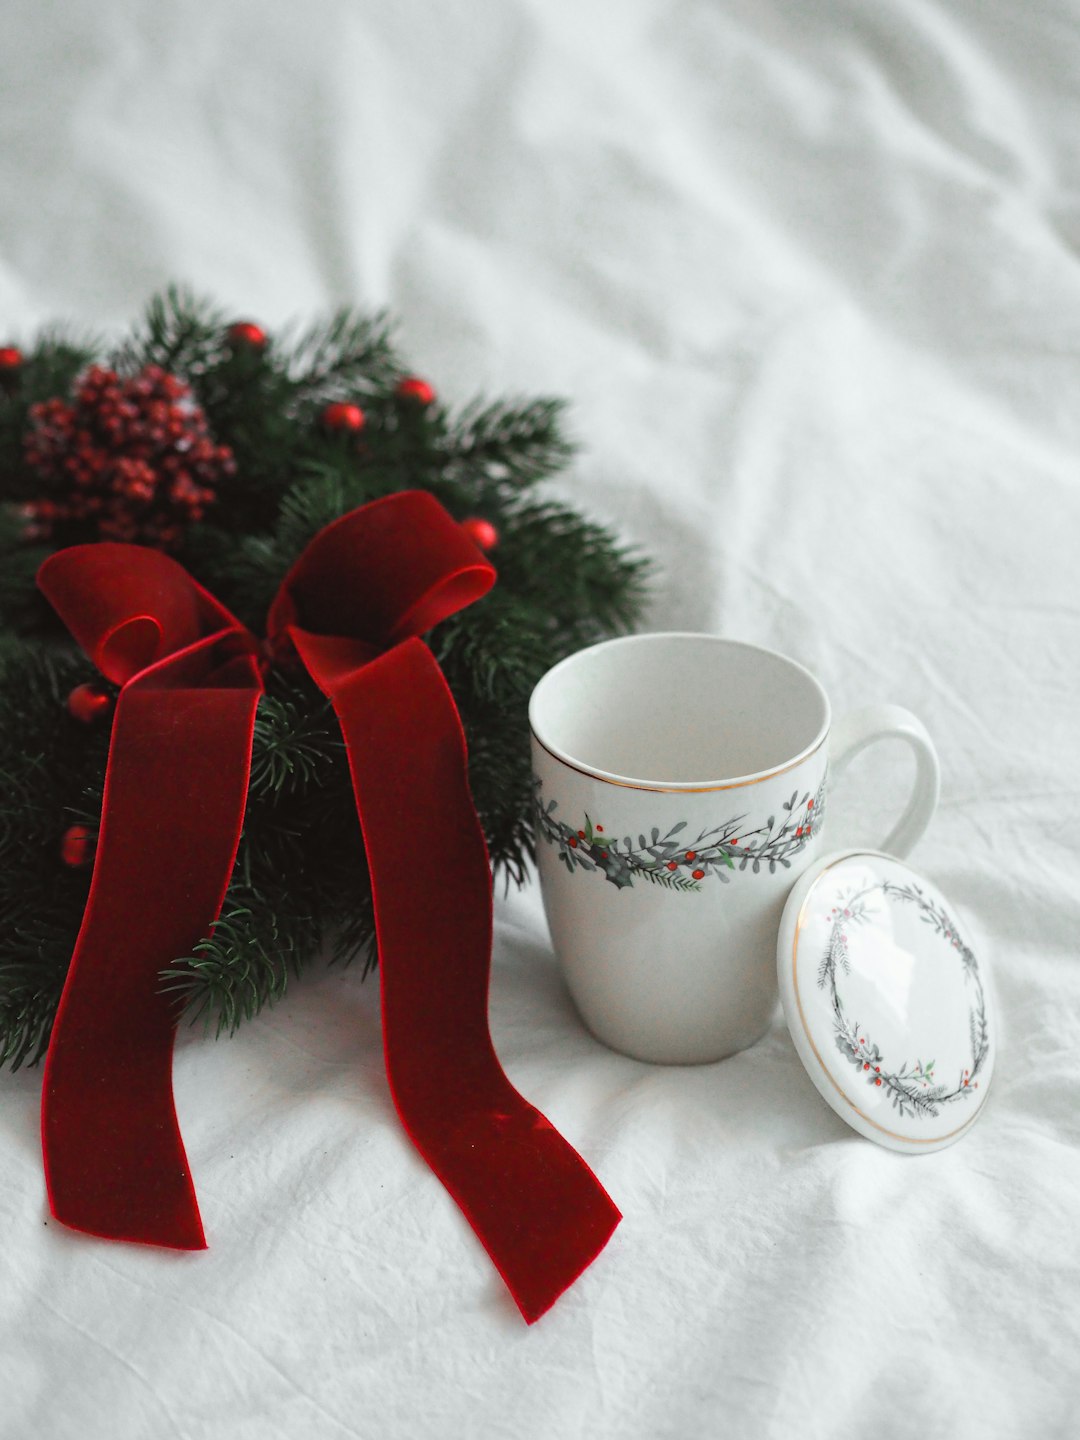 red and white ceramic mug with red ribbon on white textile